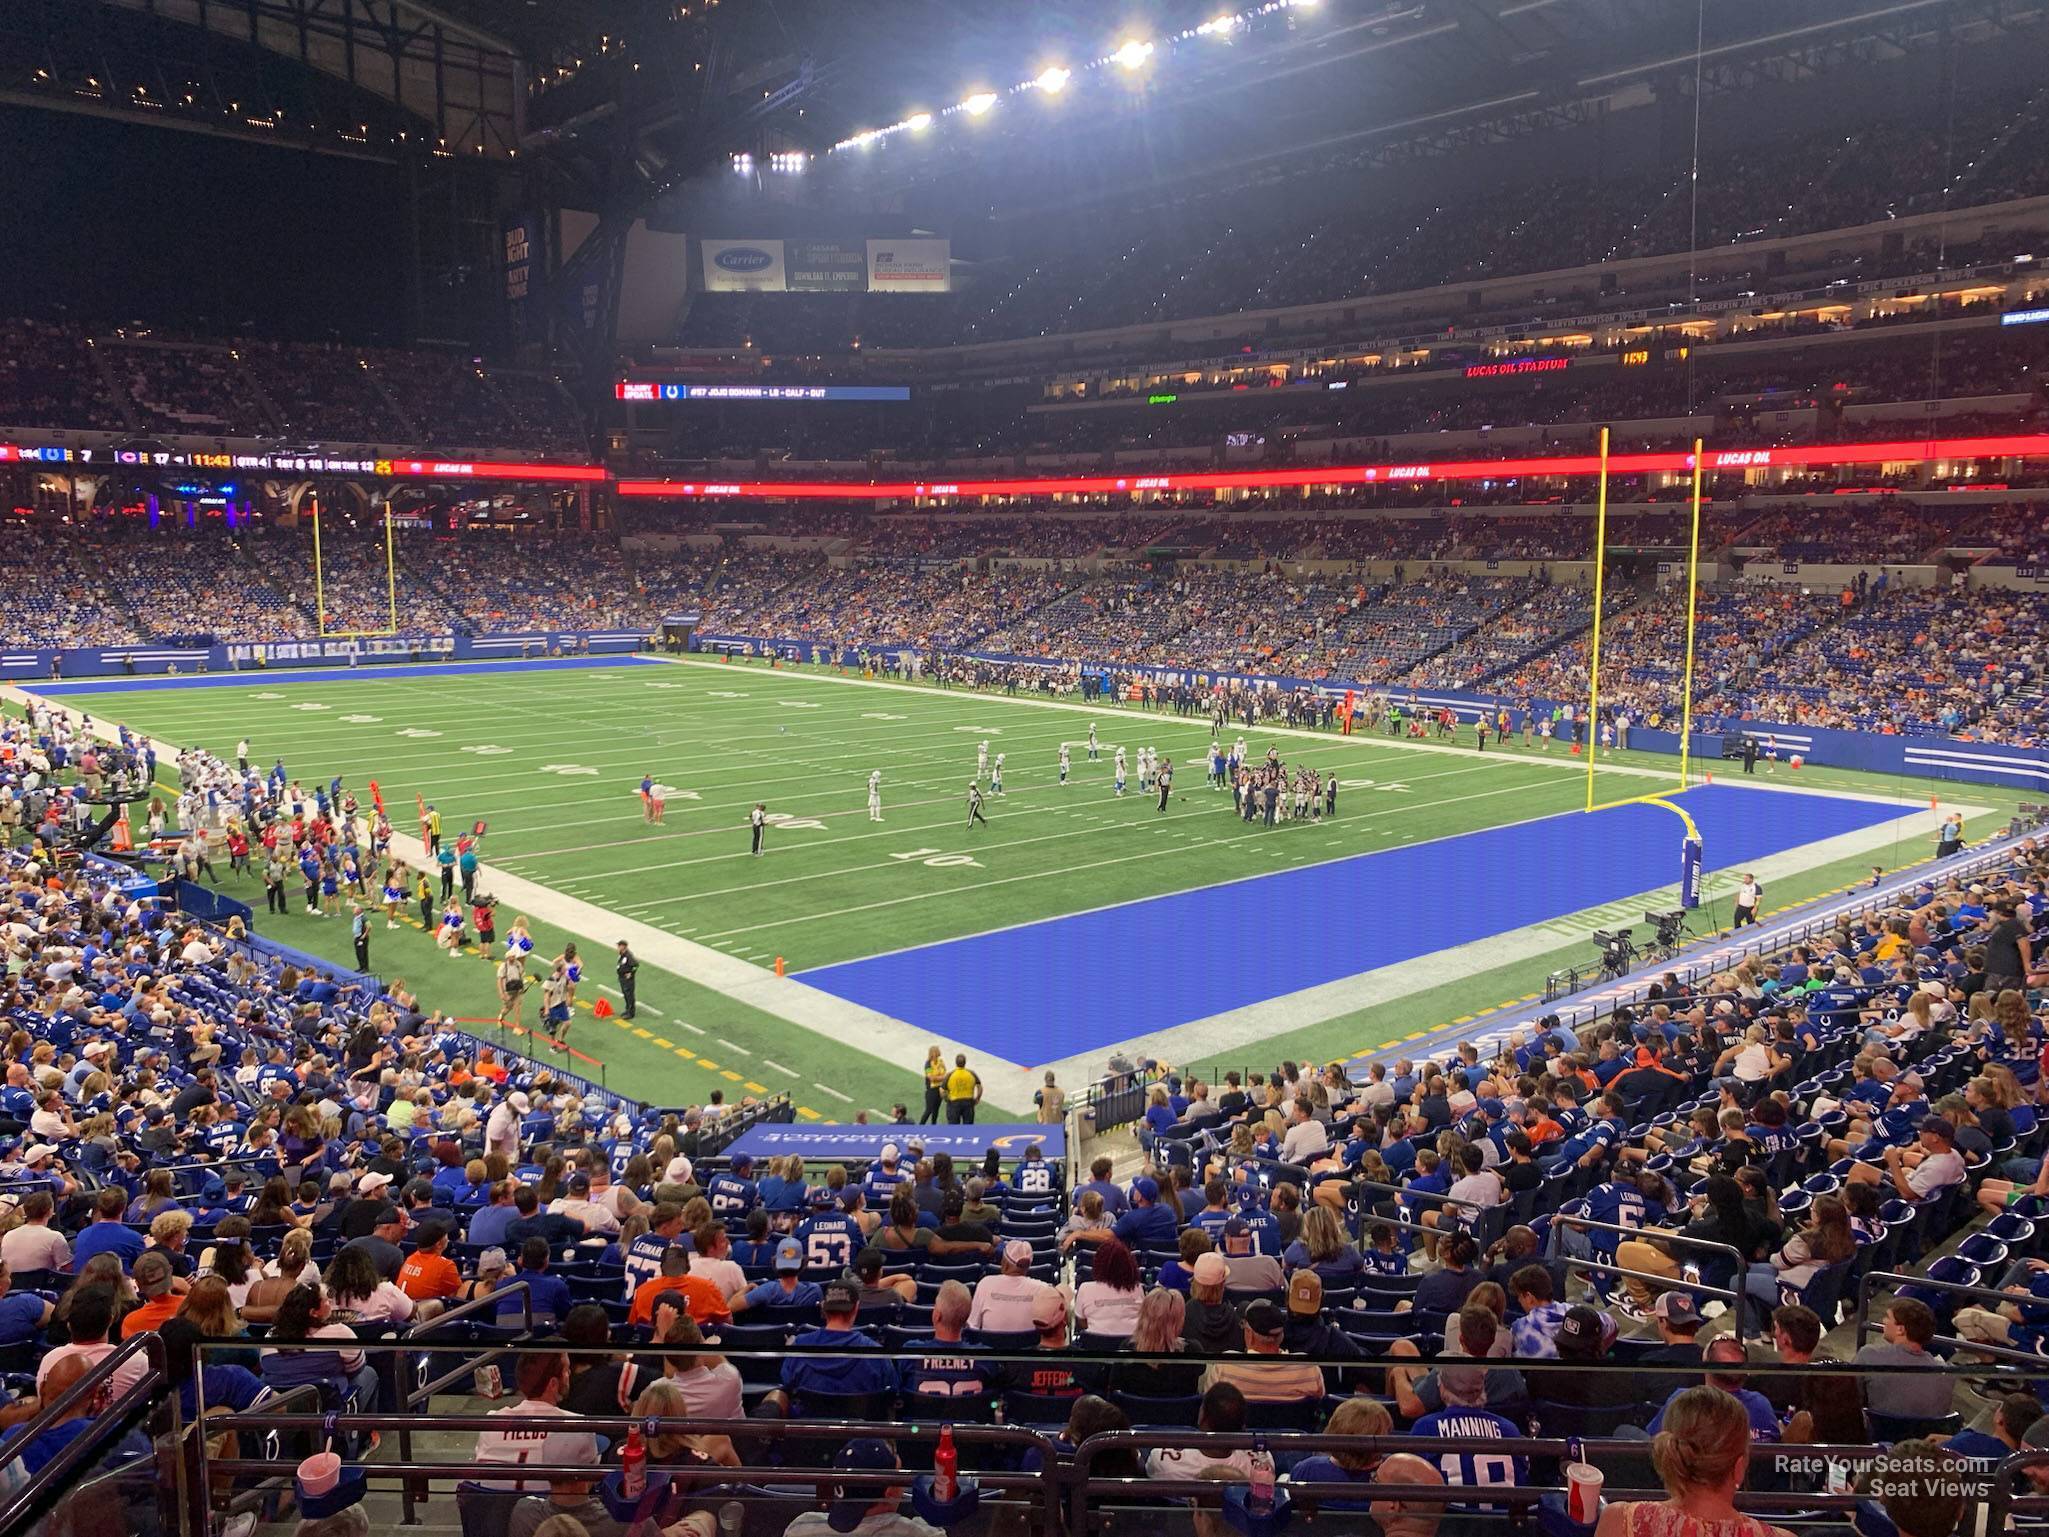 section 232, row 1 seat view  for football - lucas oil stadium